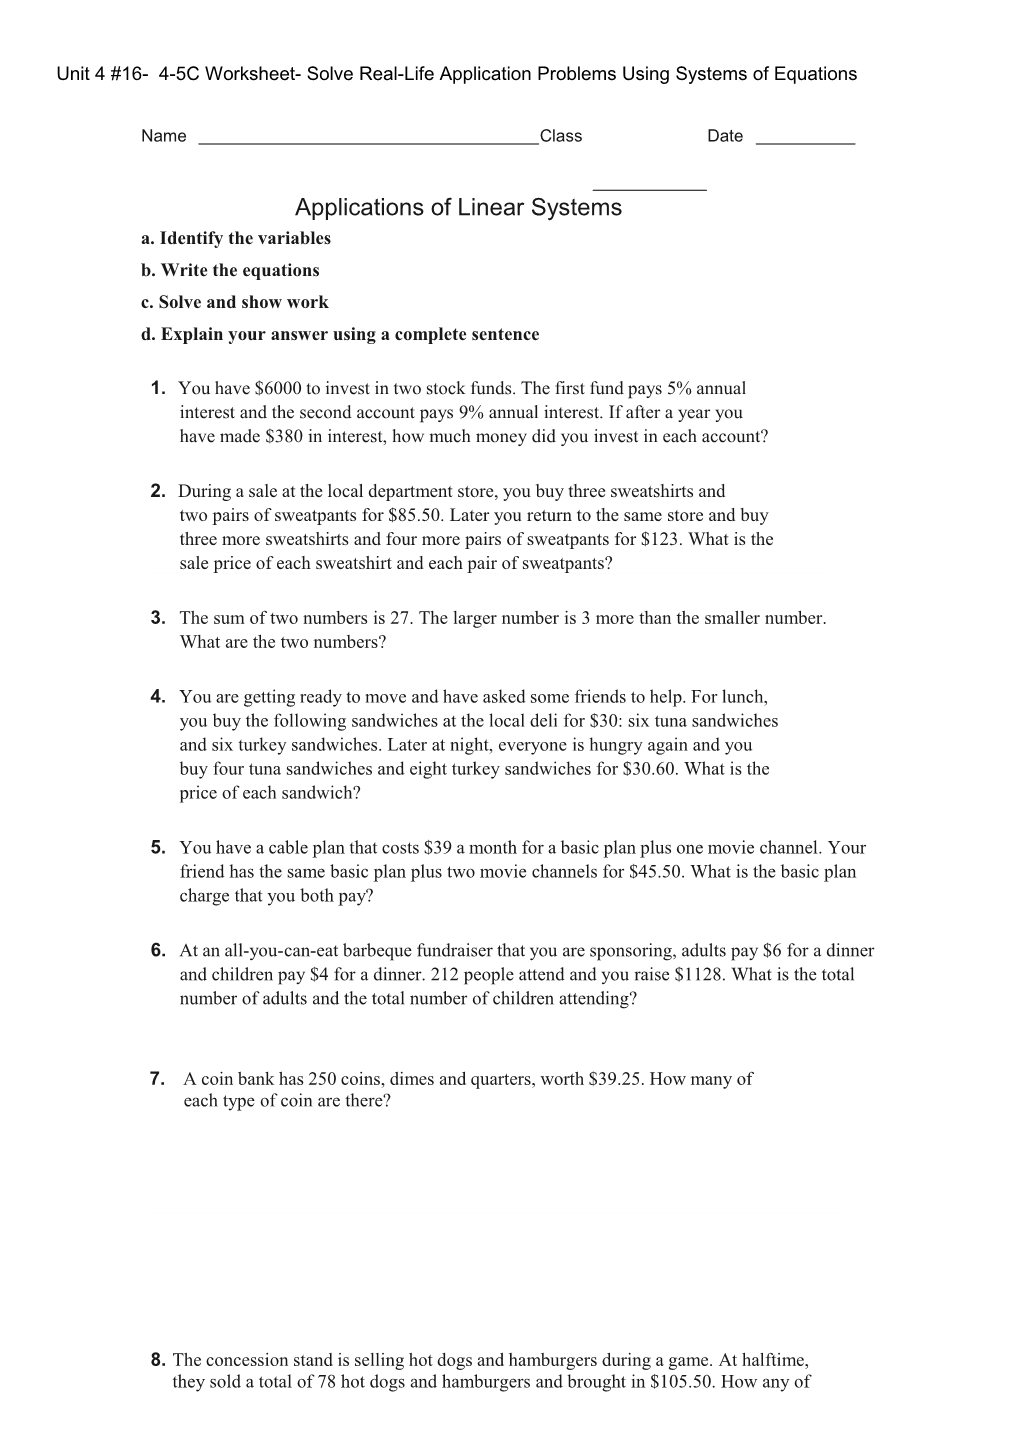 Unit 4 #16- 4-5C Worksheet- Solve Real-Life Application Problems Using Systems of Equations